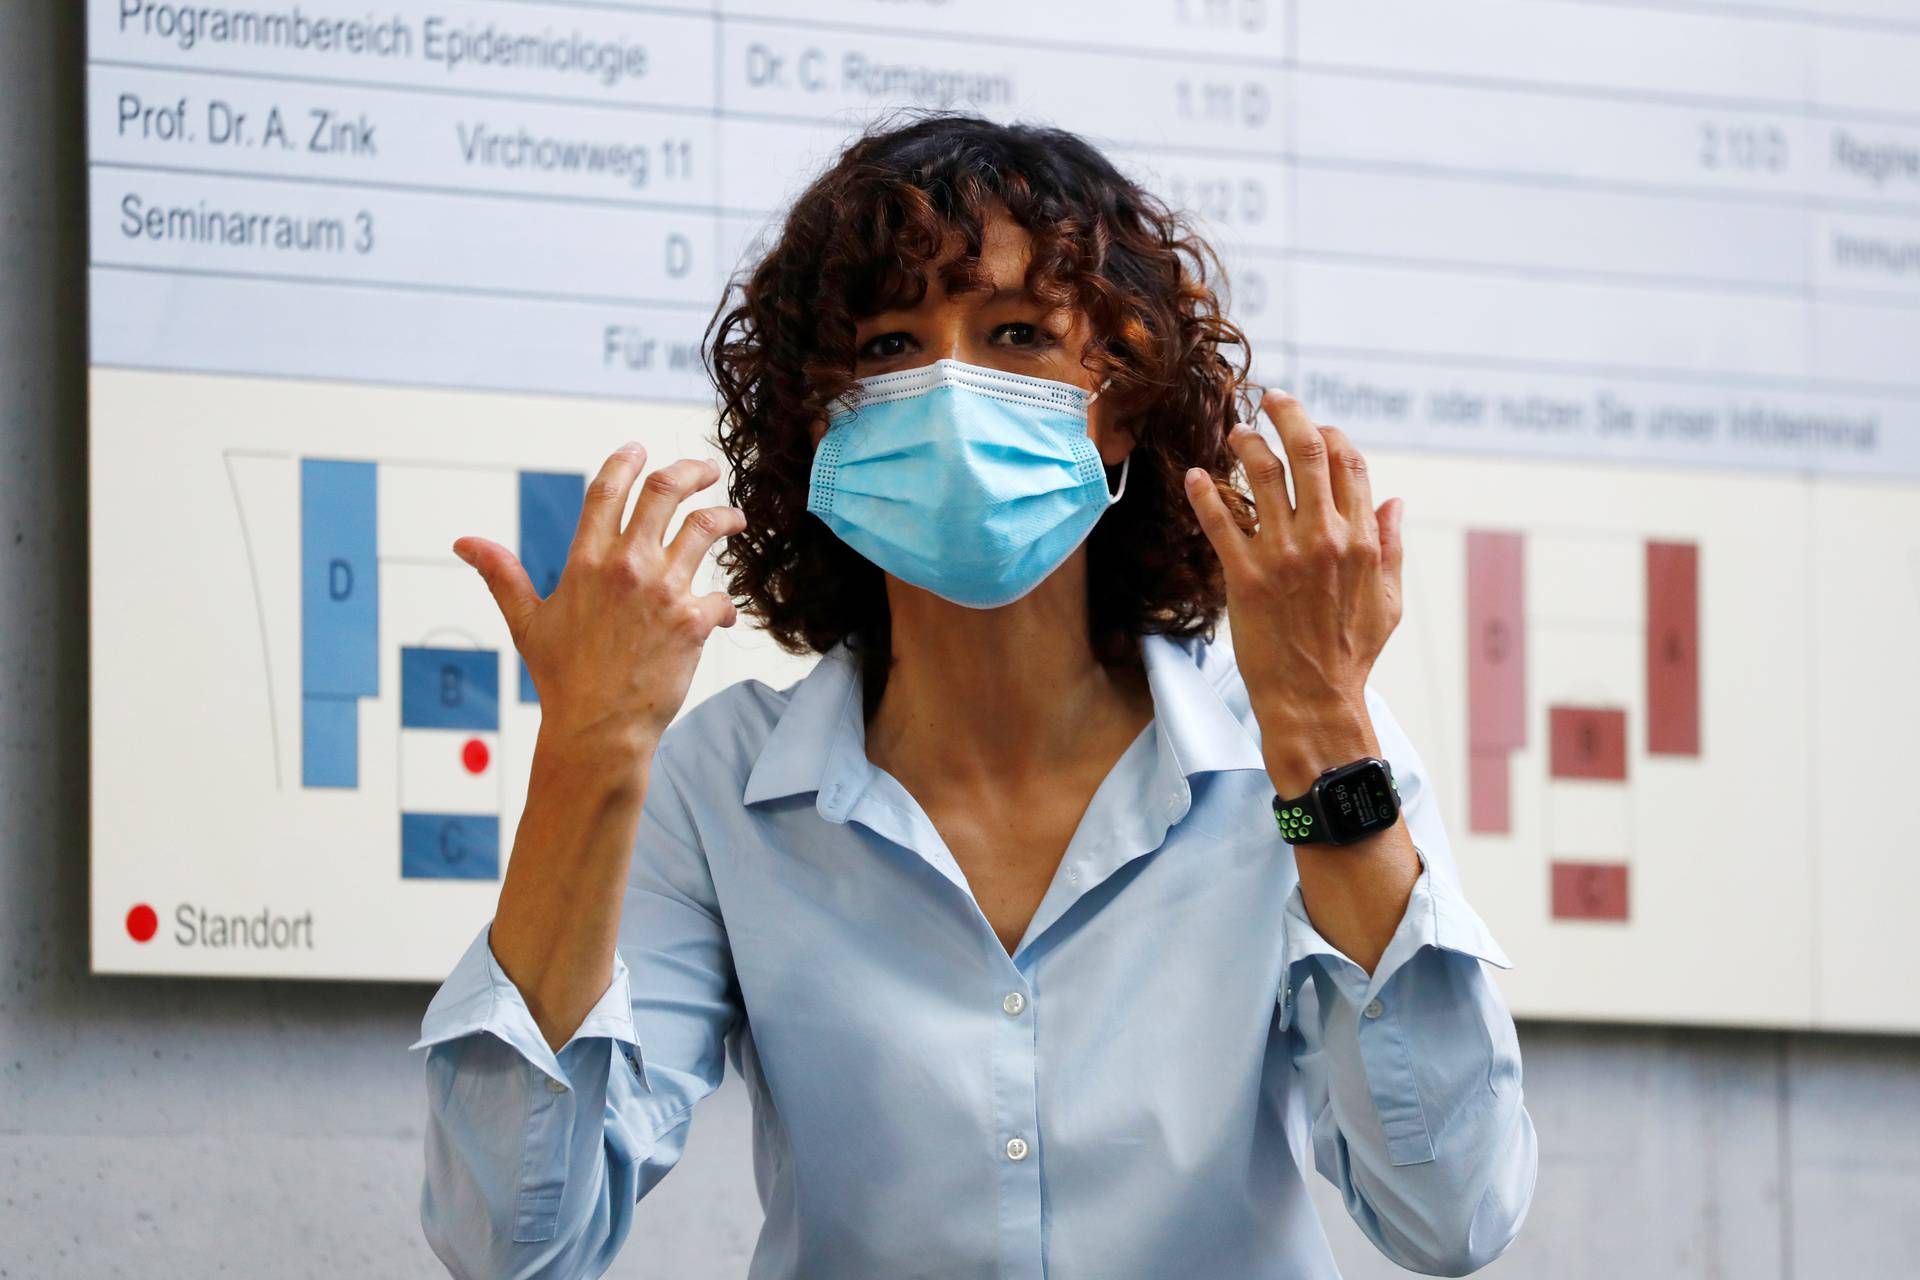 Scientist Emmanuelle Charpentier, director of the Max Planck Institute for Infection Biology in Berlin puts on a protective face mask, after winning the 2020 Nobel Prize in Chemistry for the development of a method for genome editing, in Berlin